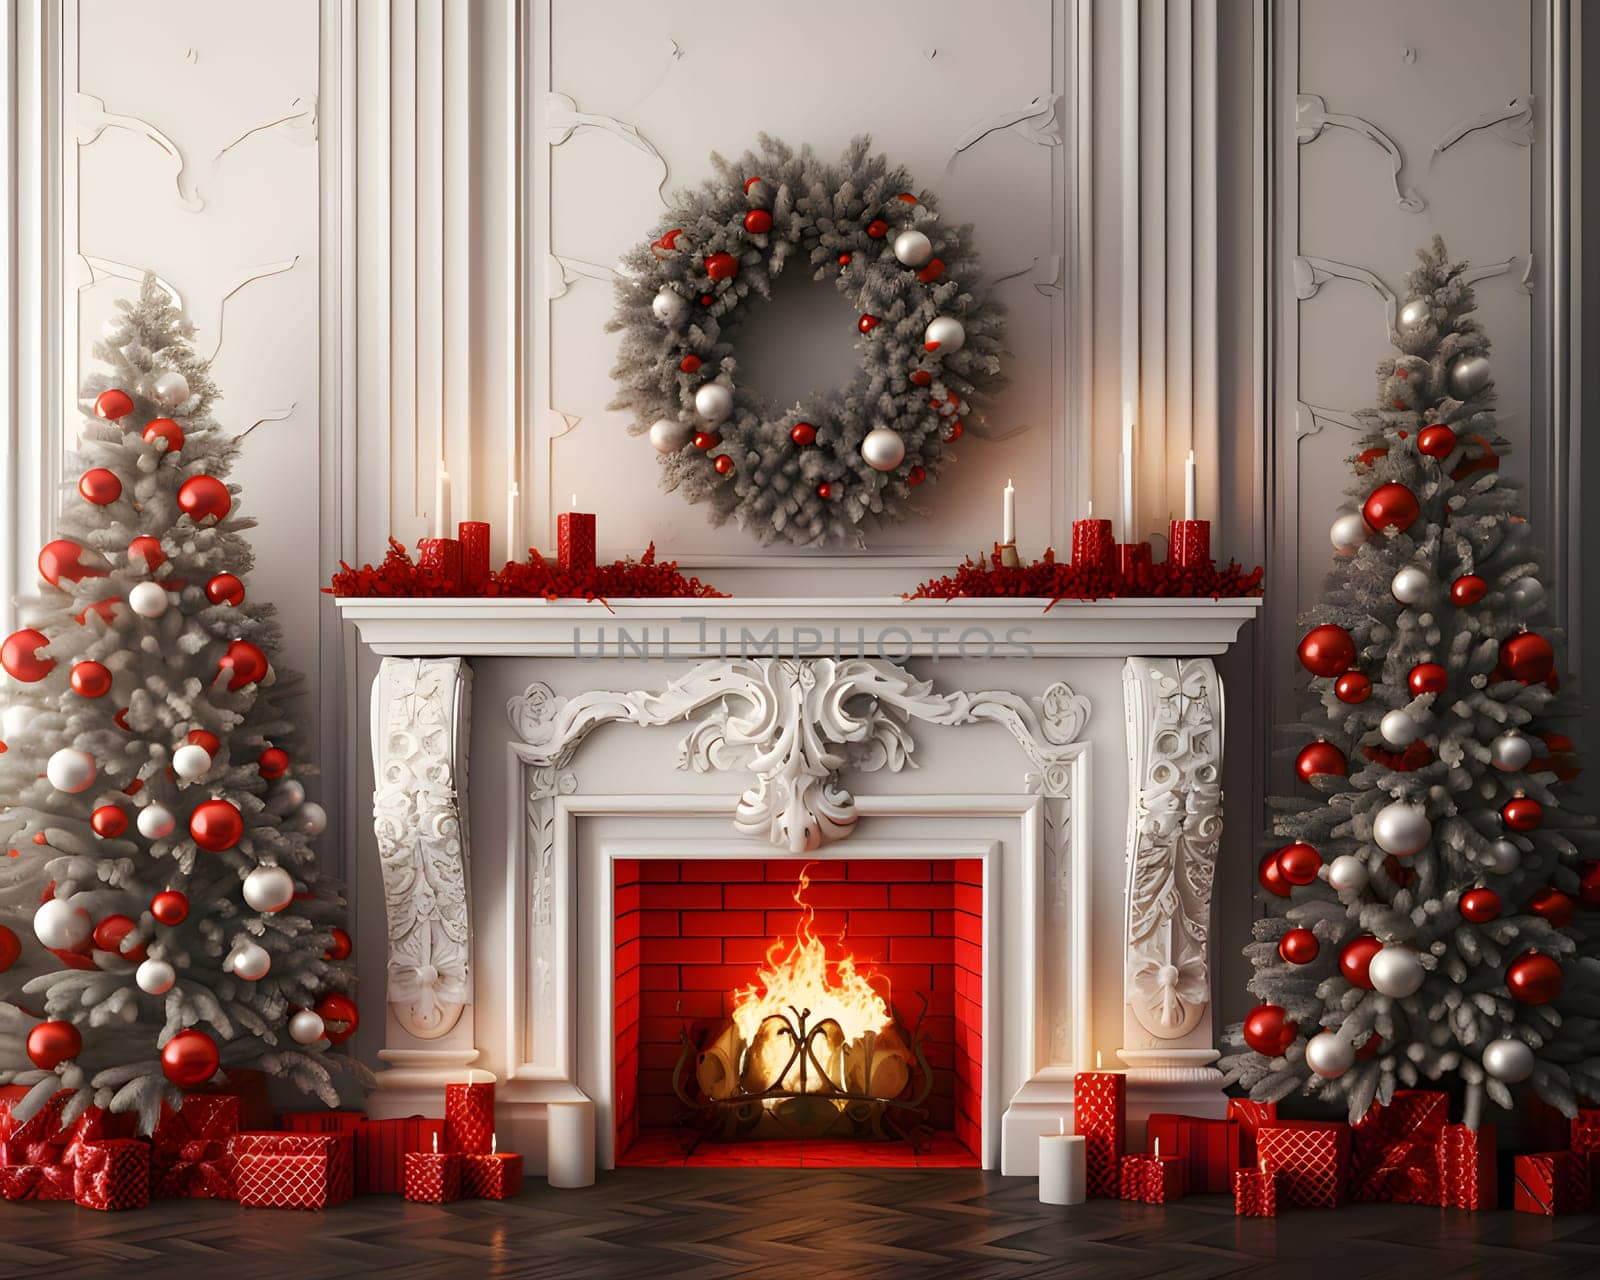 Home Fireplace, on the sides of the Christmas tree with red and silver baubles, in the middle a wreath and gifts of red candle. Xmas tree as a symbol of Christmas of the birth of the Savior. A time of joy and celebration.